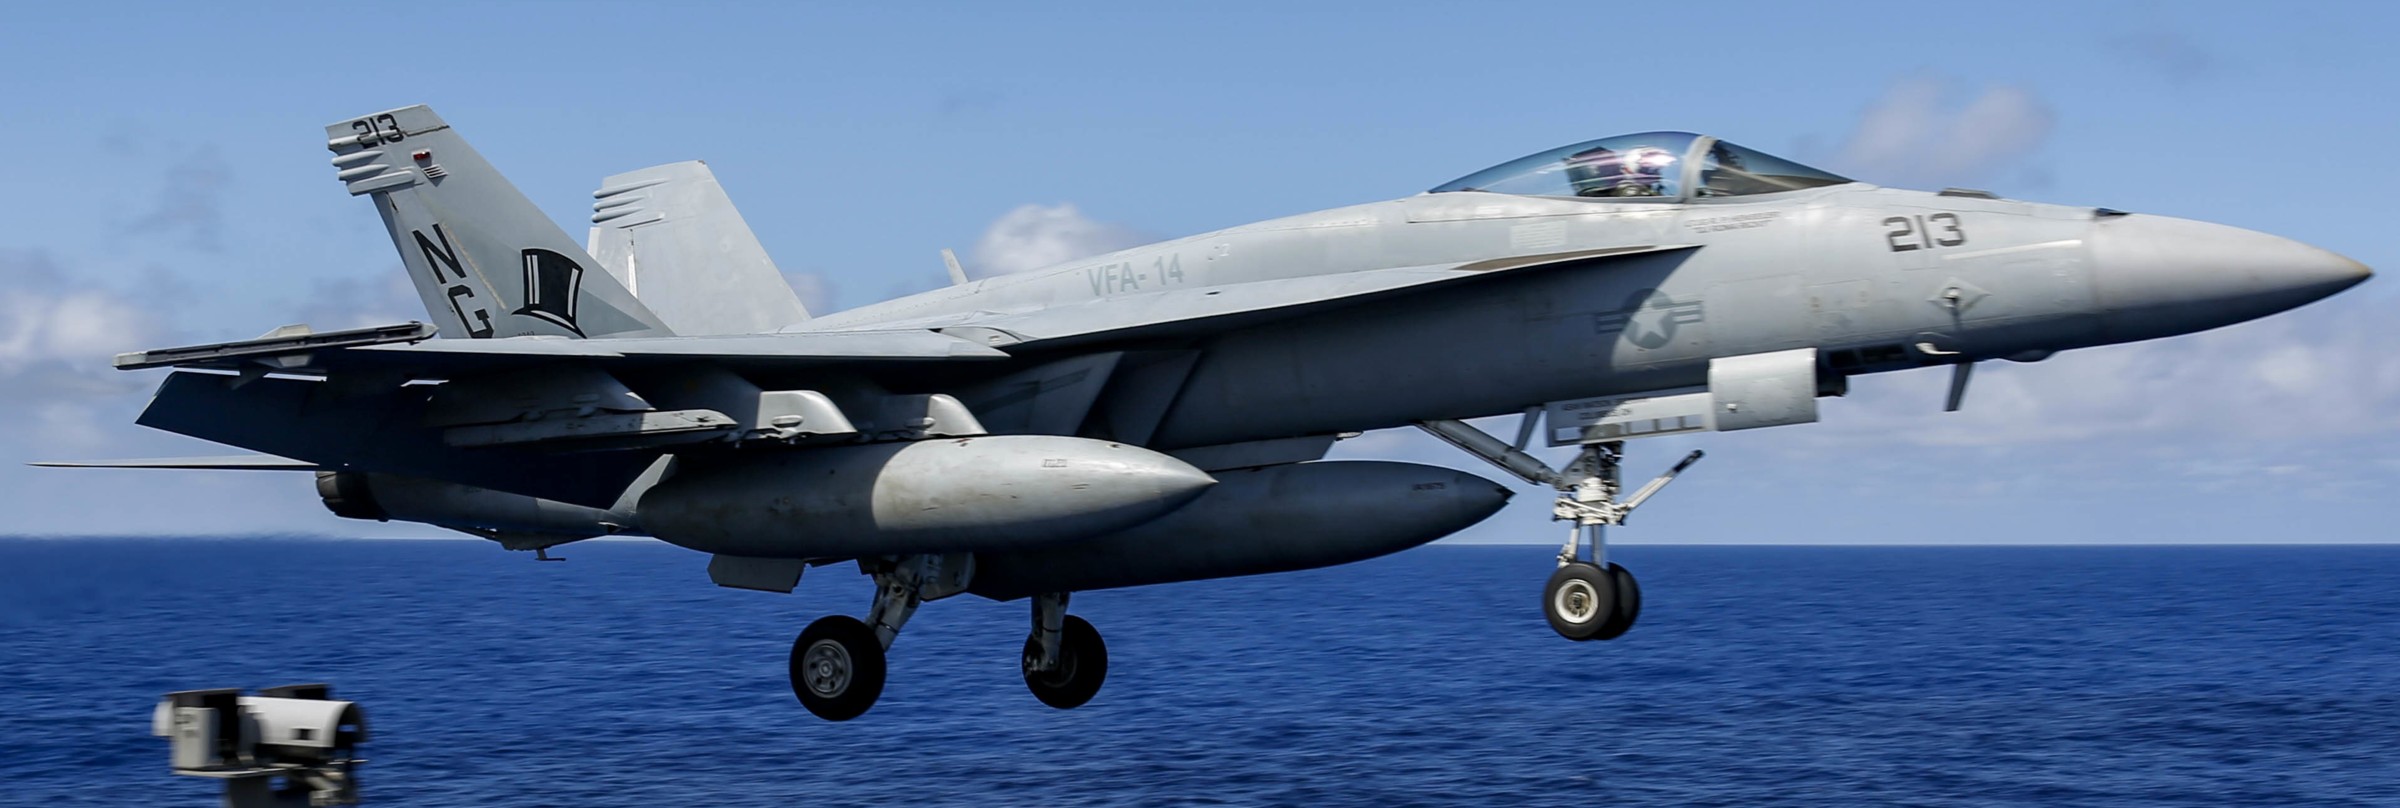 vfa-14 tophatters strike fighter squadron f/a-18e super hornet cvn-72 uss abraham lincoln cvw-9 us navy 58